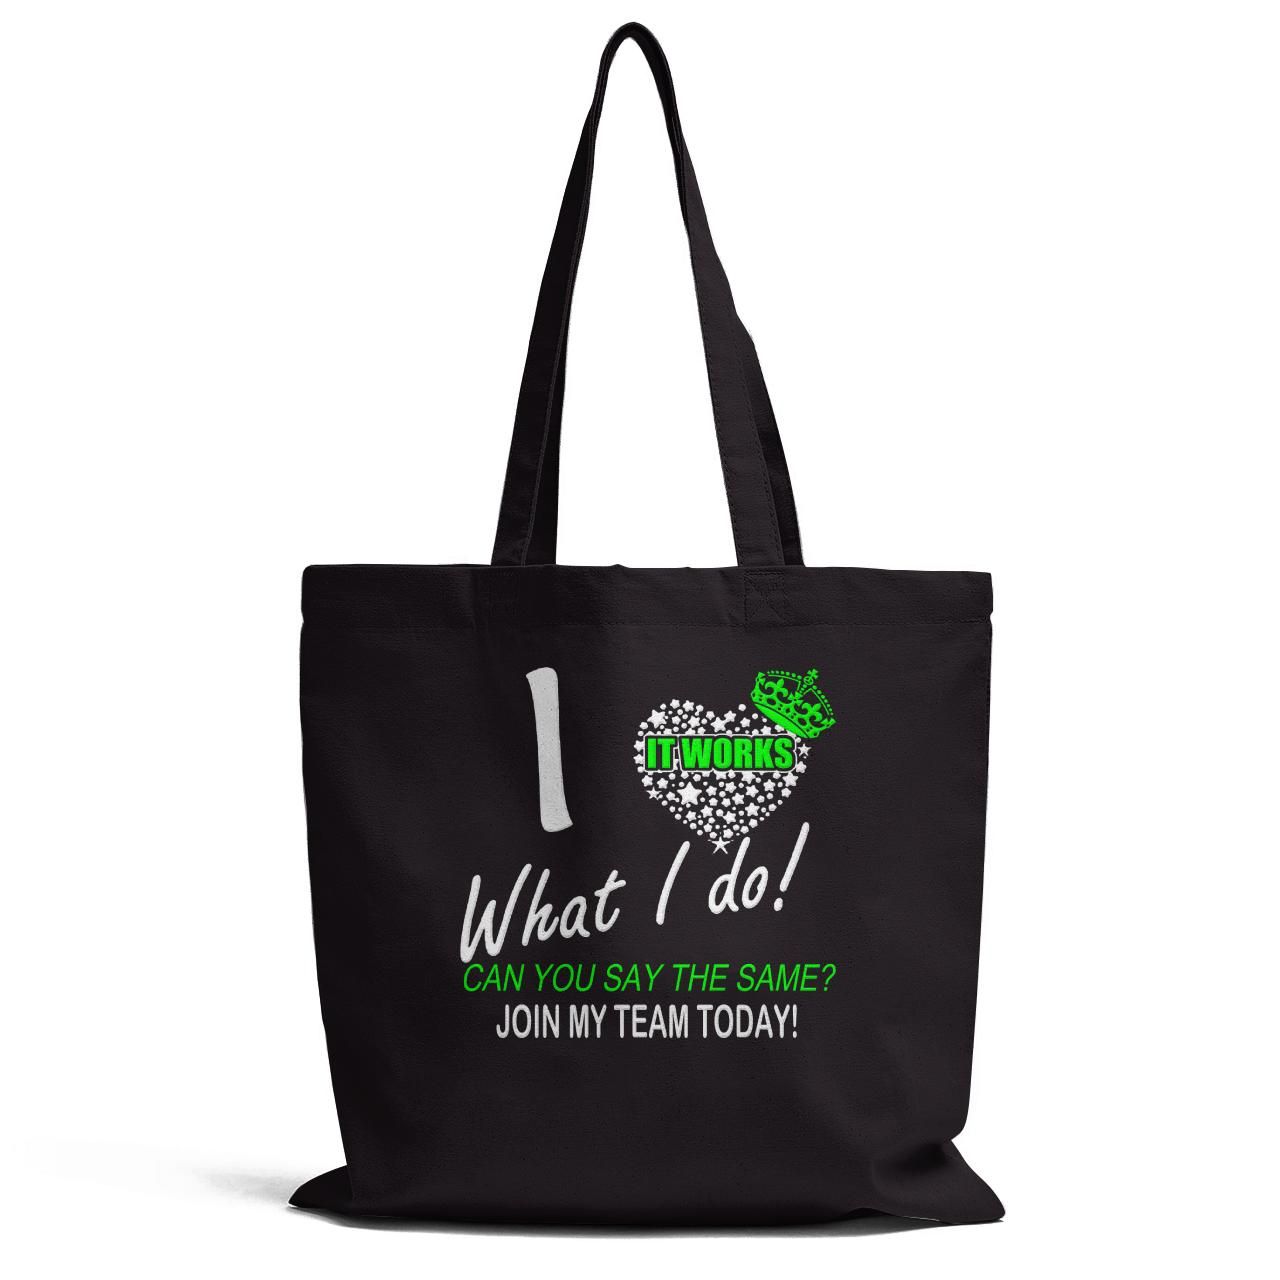 Can You Sat The Same Join My Team Today Tote Bag